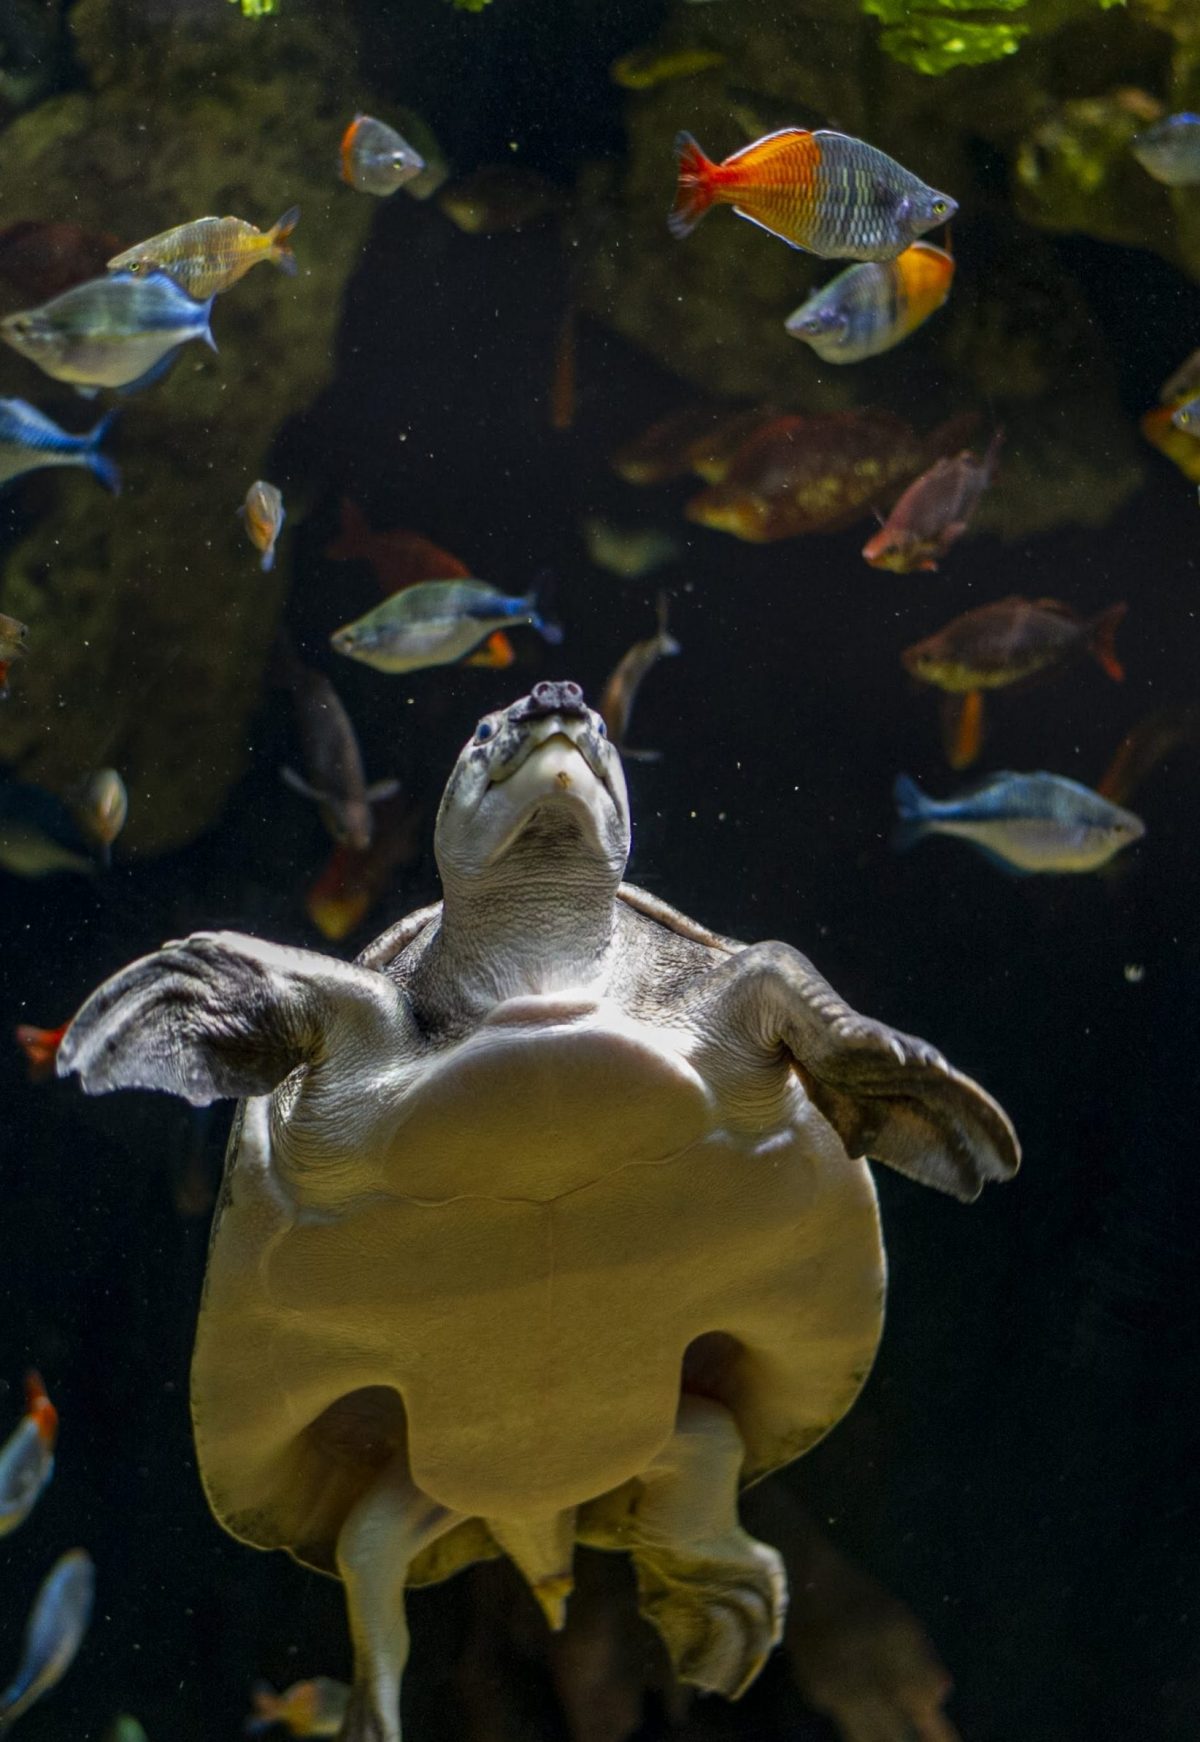 A Pig-nosed Turtle swimming amongst Rainbowfish in the Fly River exhibit